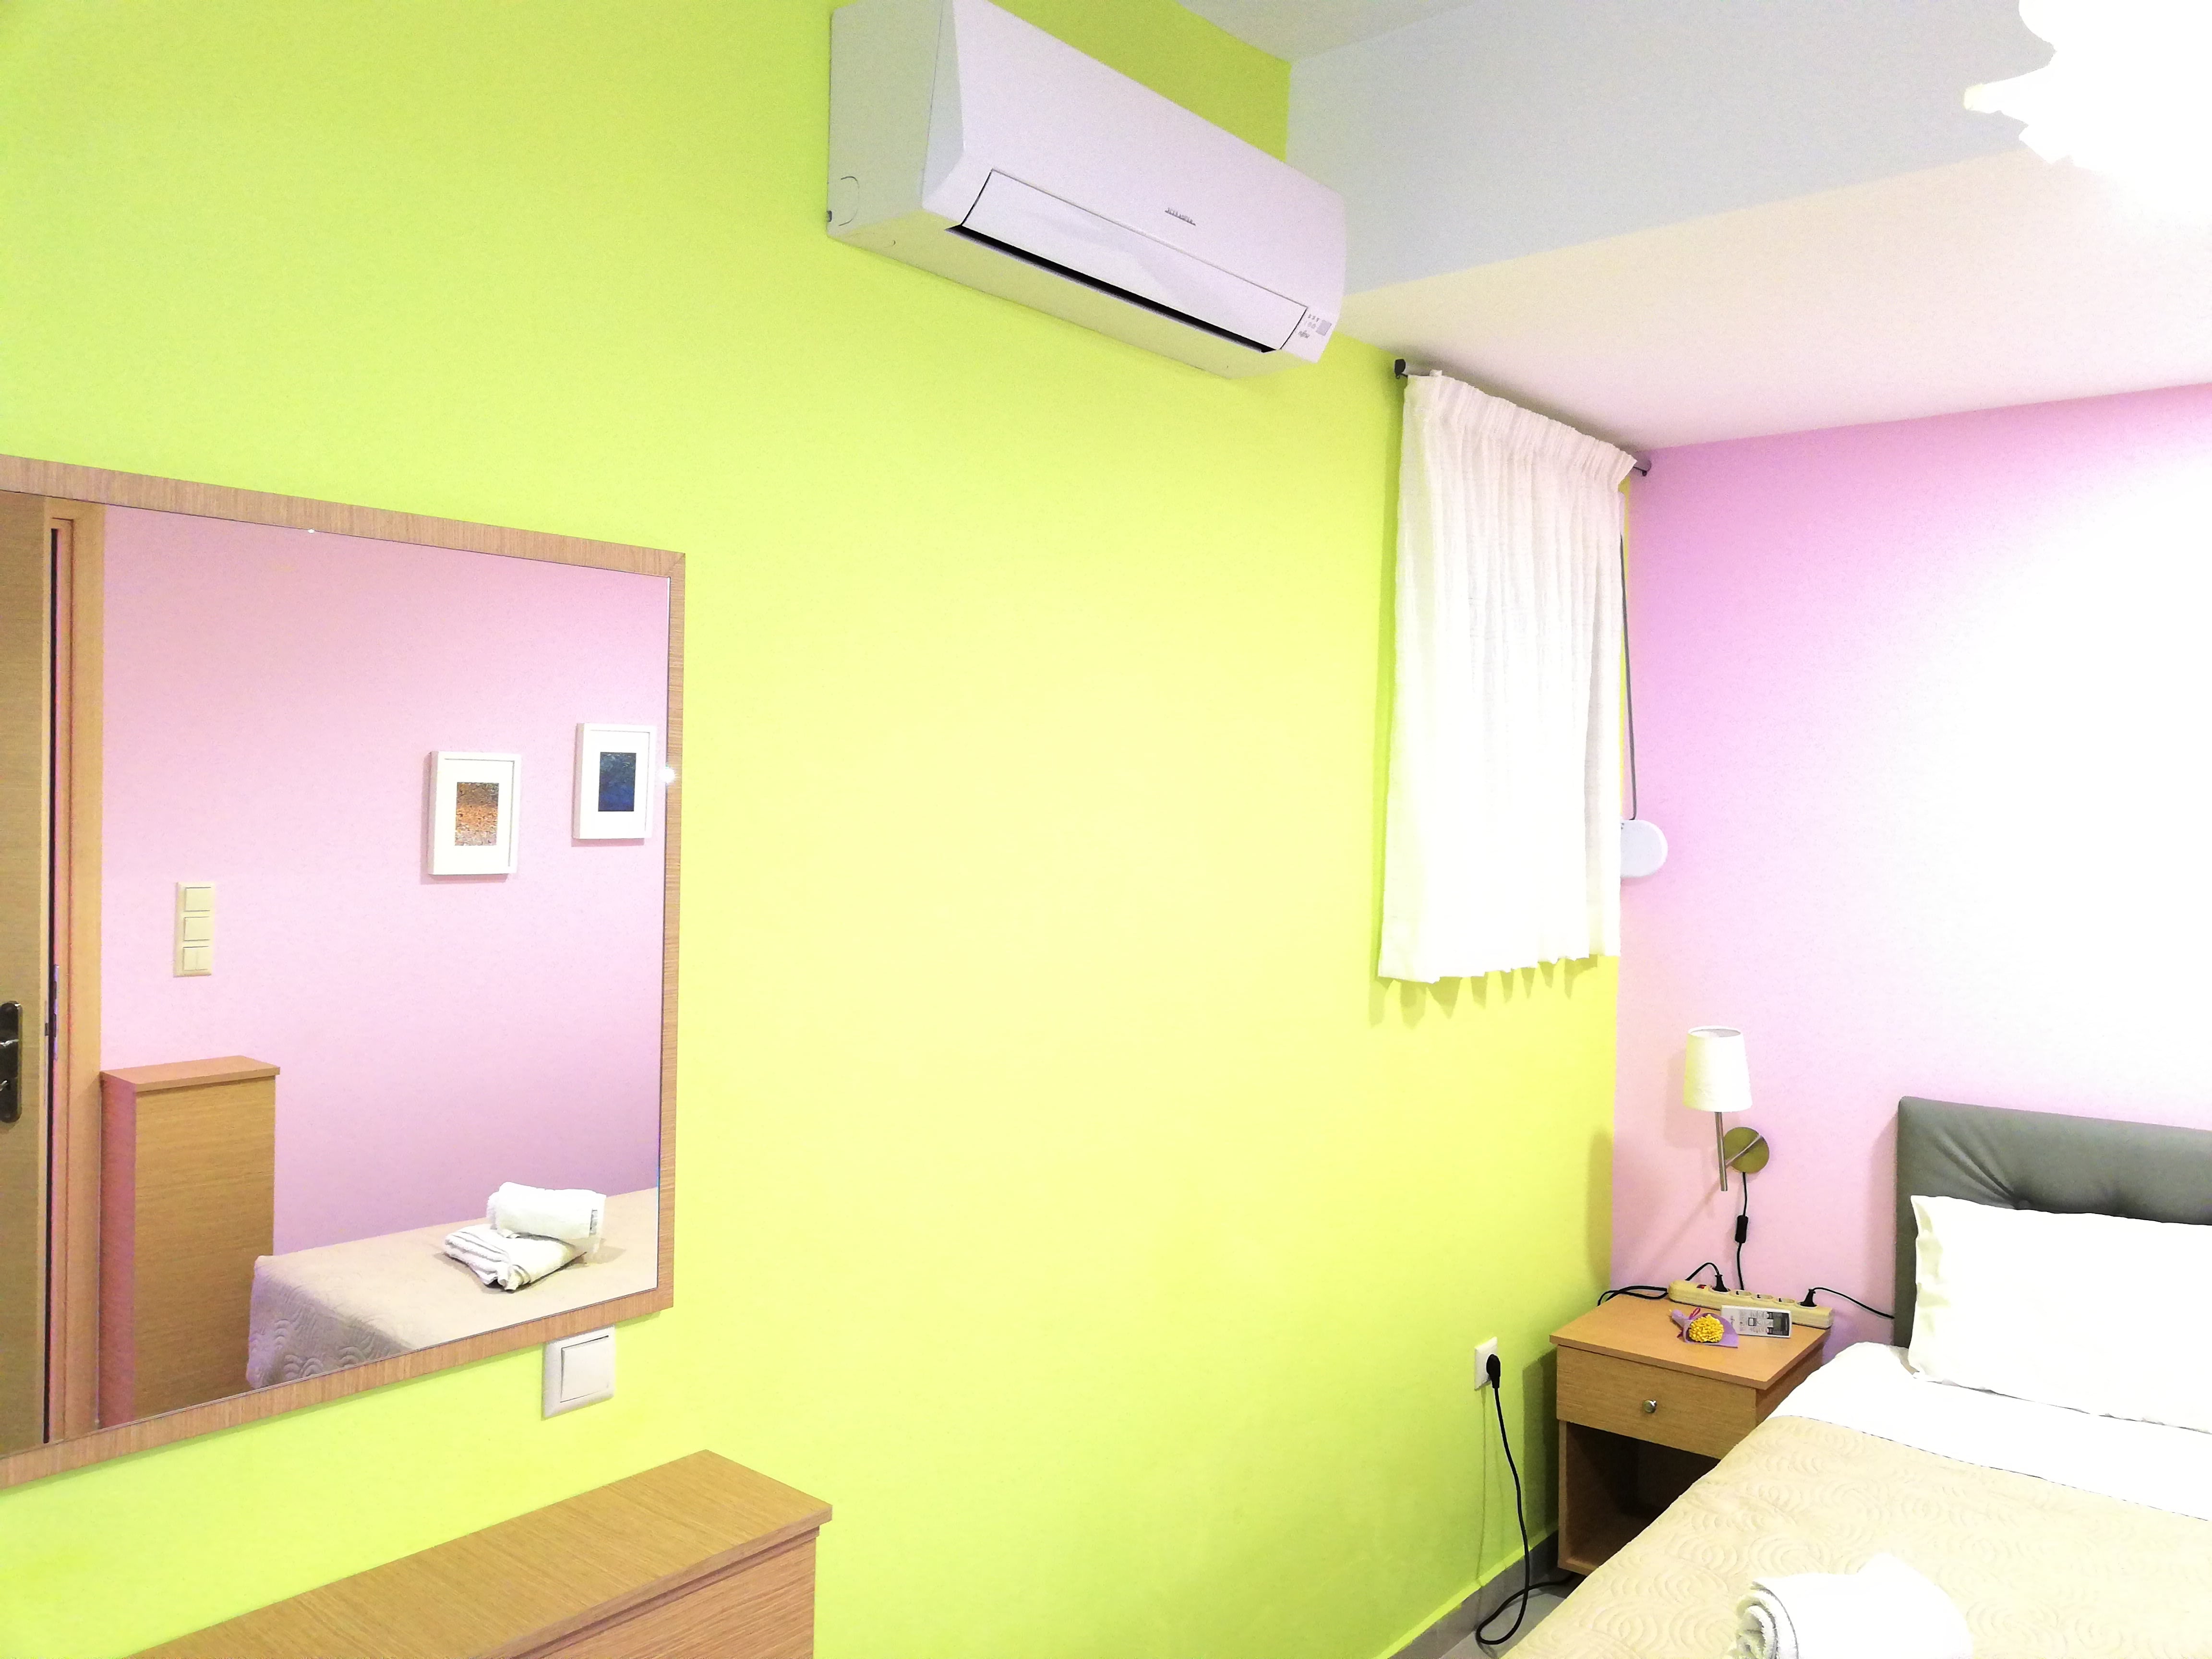 Air-conditioned Bedroom!